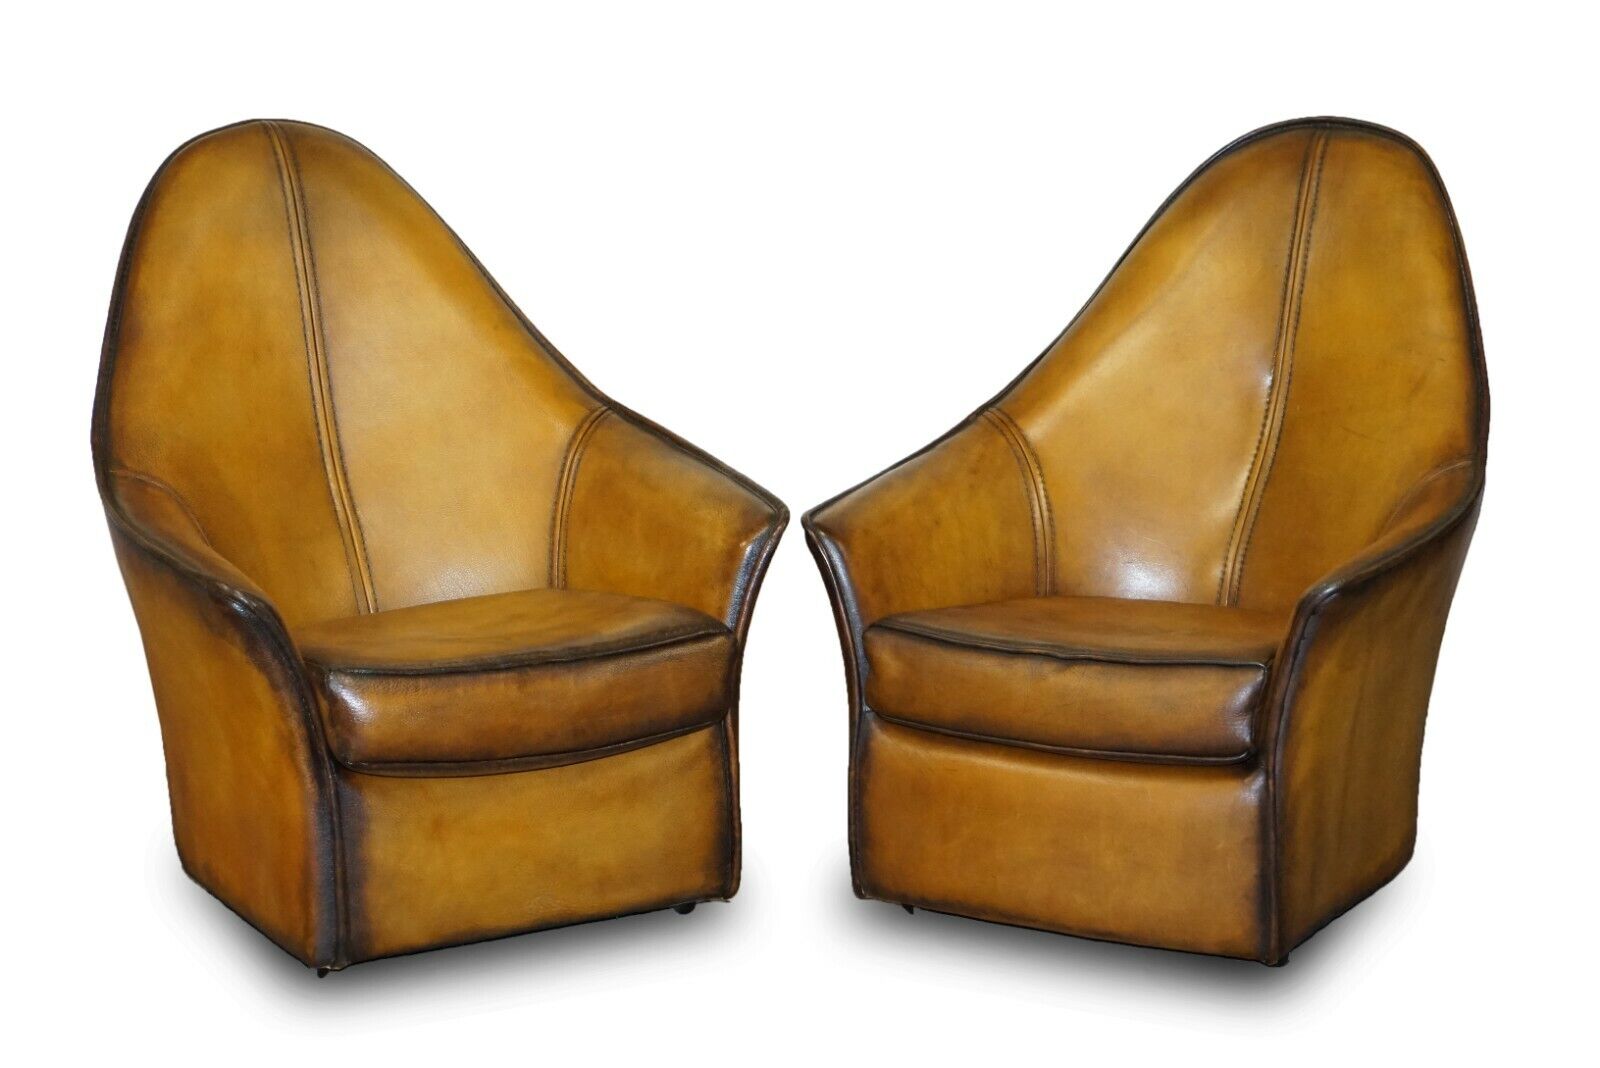 PAIR OF RESTORED ART MODERN CURVED BACK BROWN LEATHER ARMCHAIRS PART OF SUITE